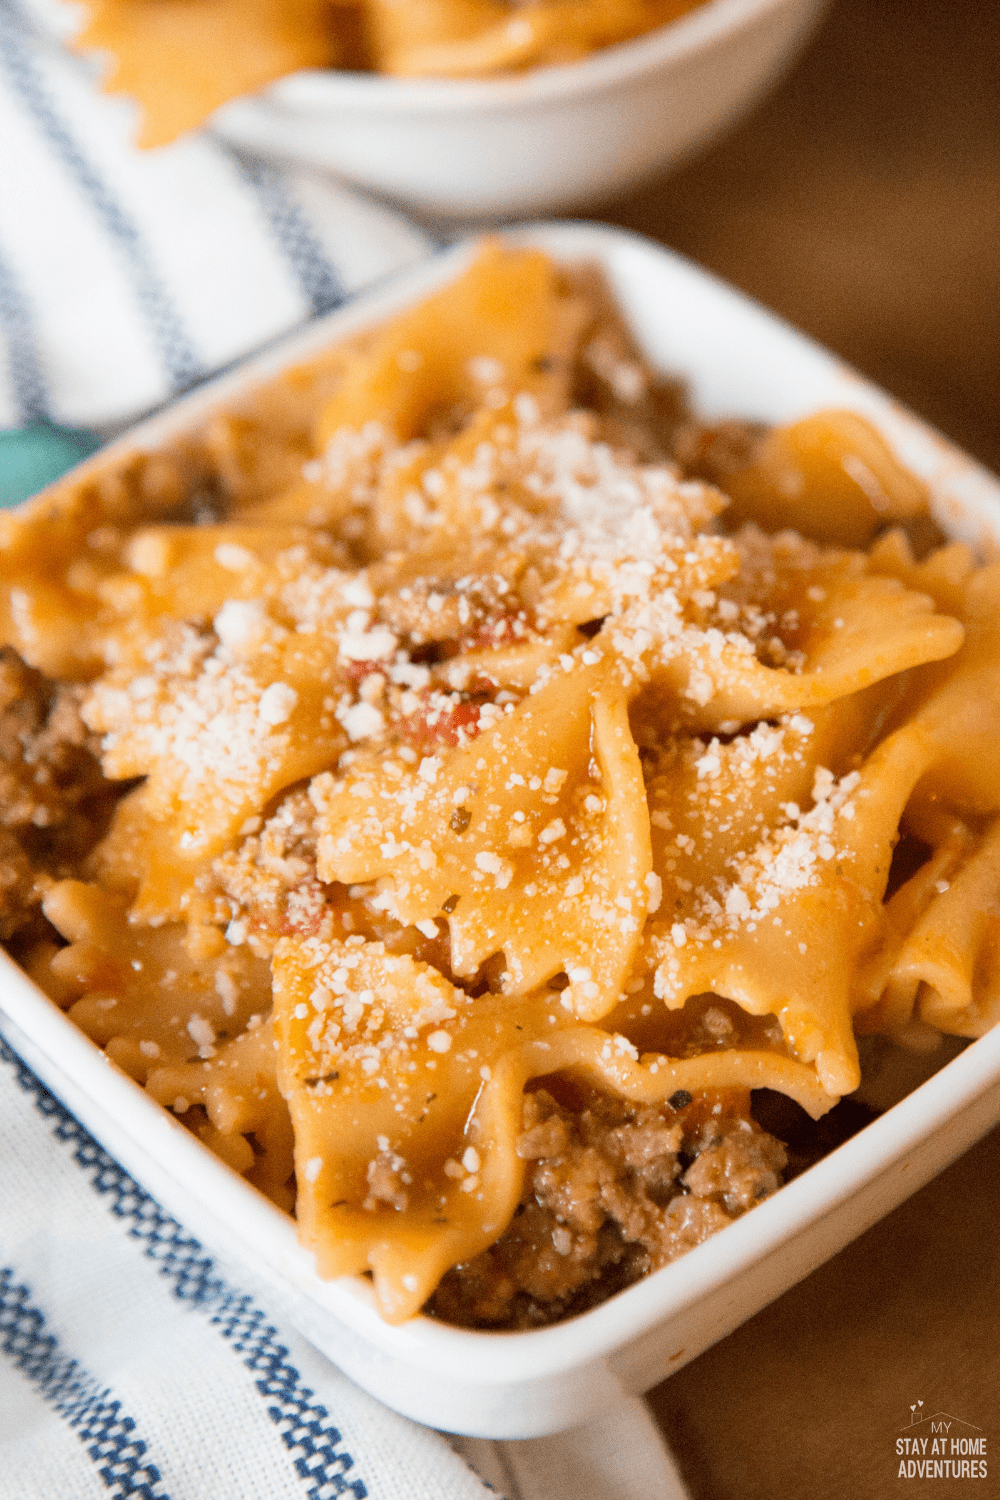 Skip the store-bought spaghetti sauce and try this delicious Instant Pot Puerto Rican style Beef and Pasta in less than 20 minutes. via @mystayathome